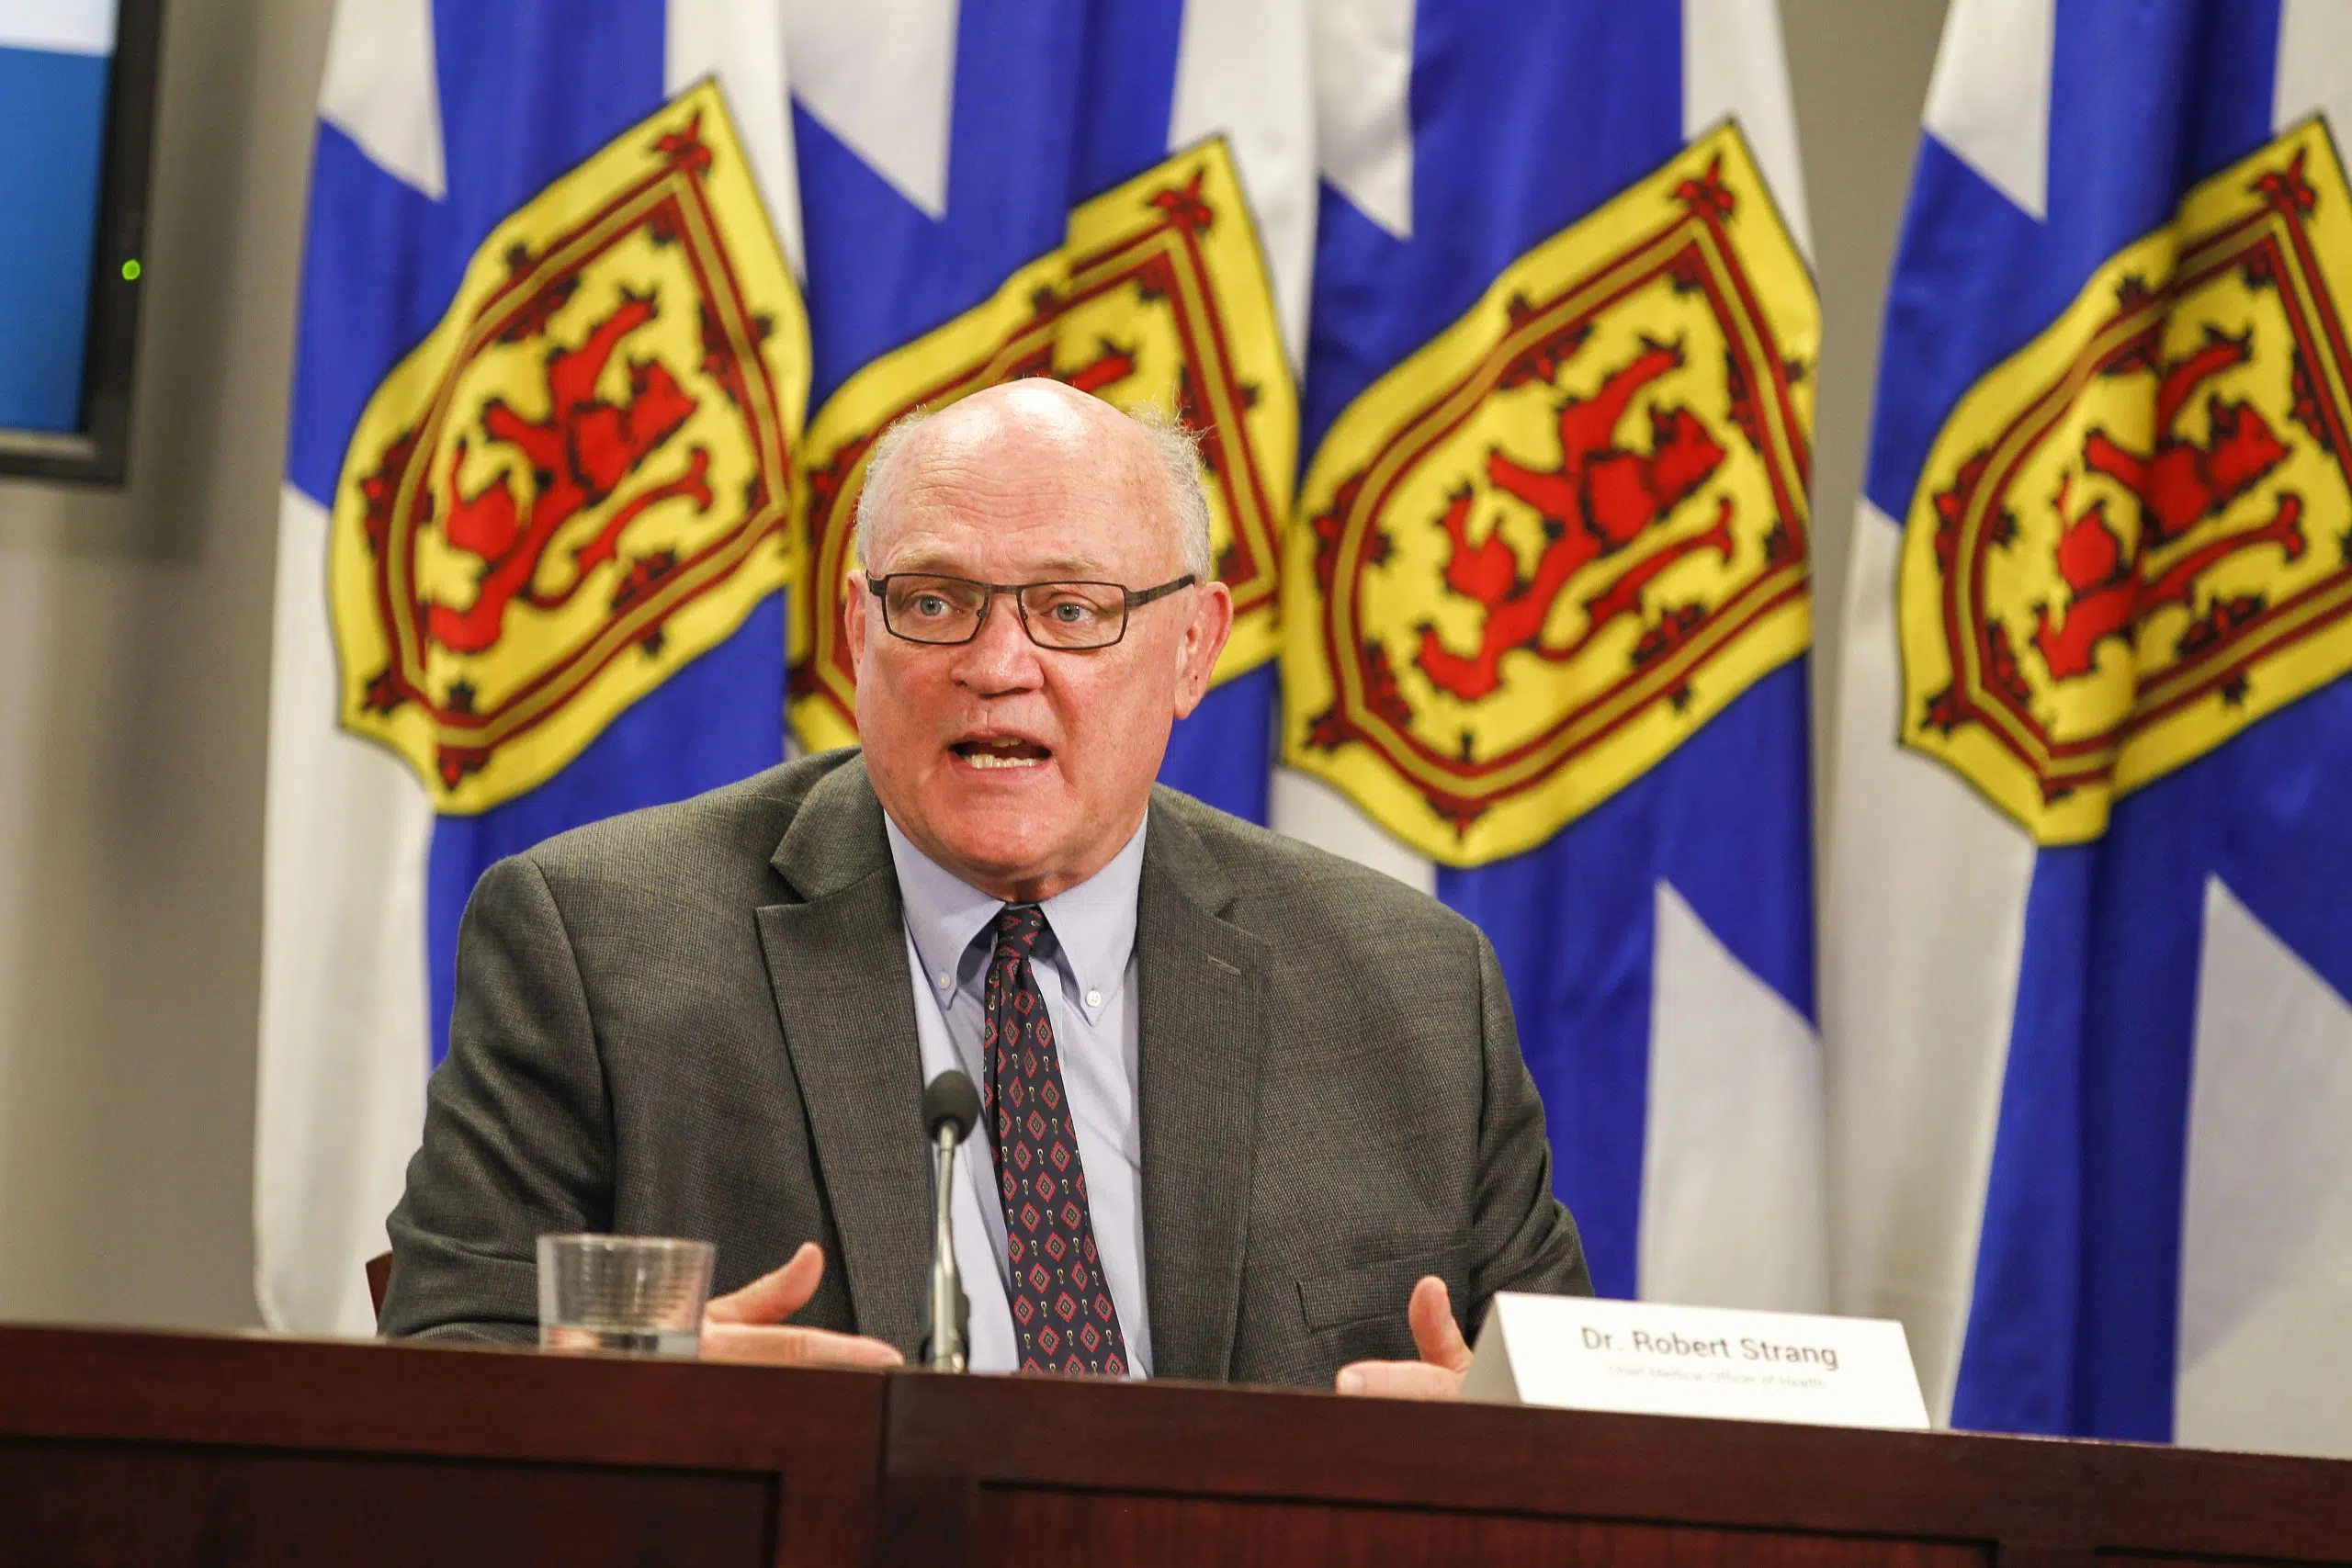 Nova Scotians to get COVID-19 update from premier, top doctor Wednesday